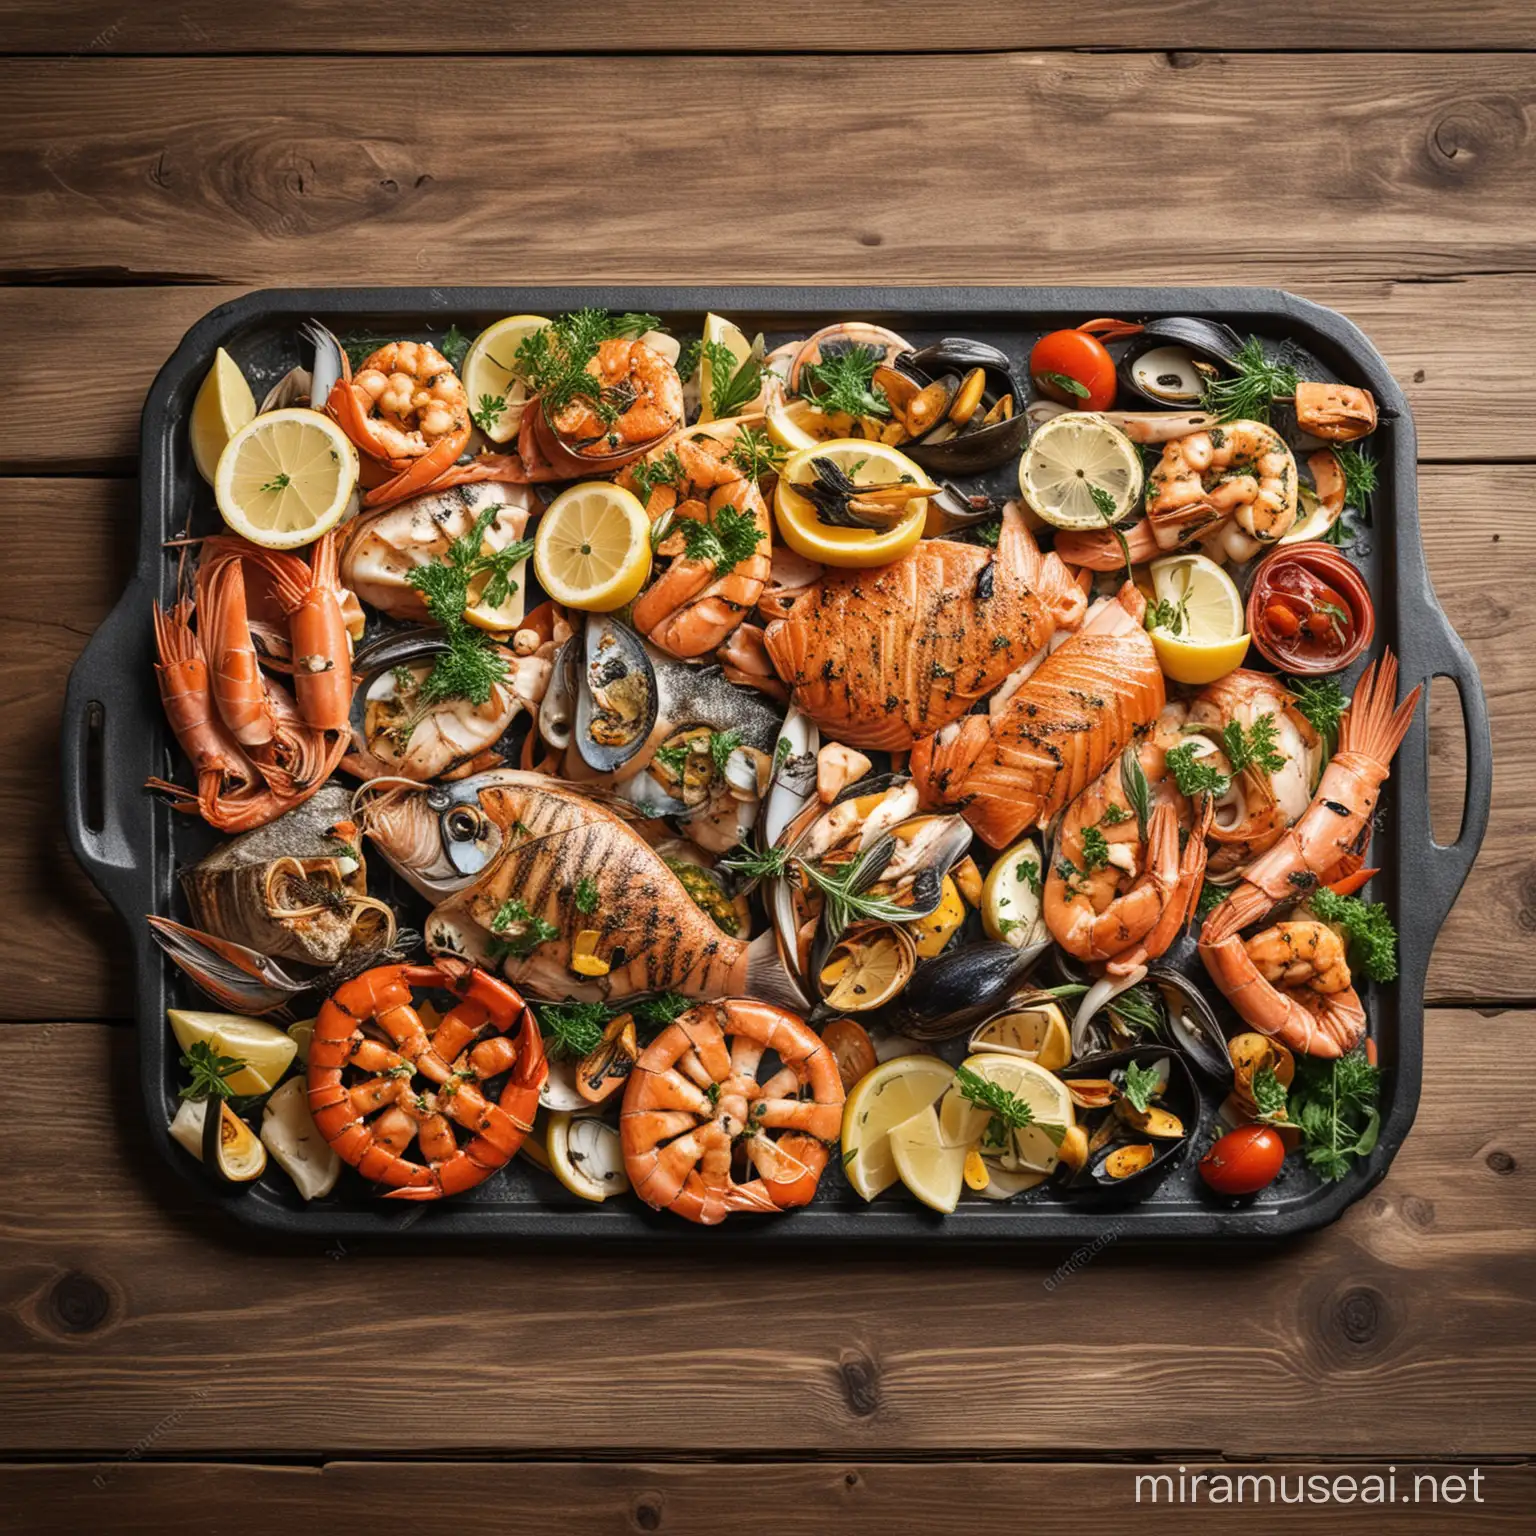 Grill plate with various types of fish and seafood